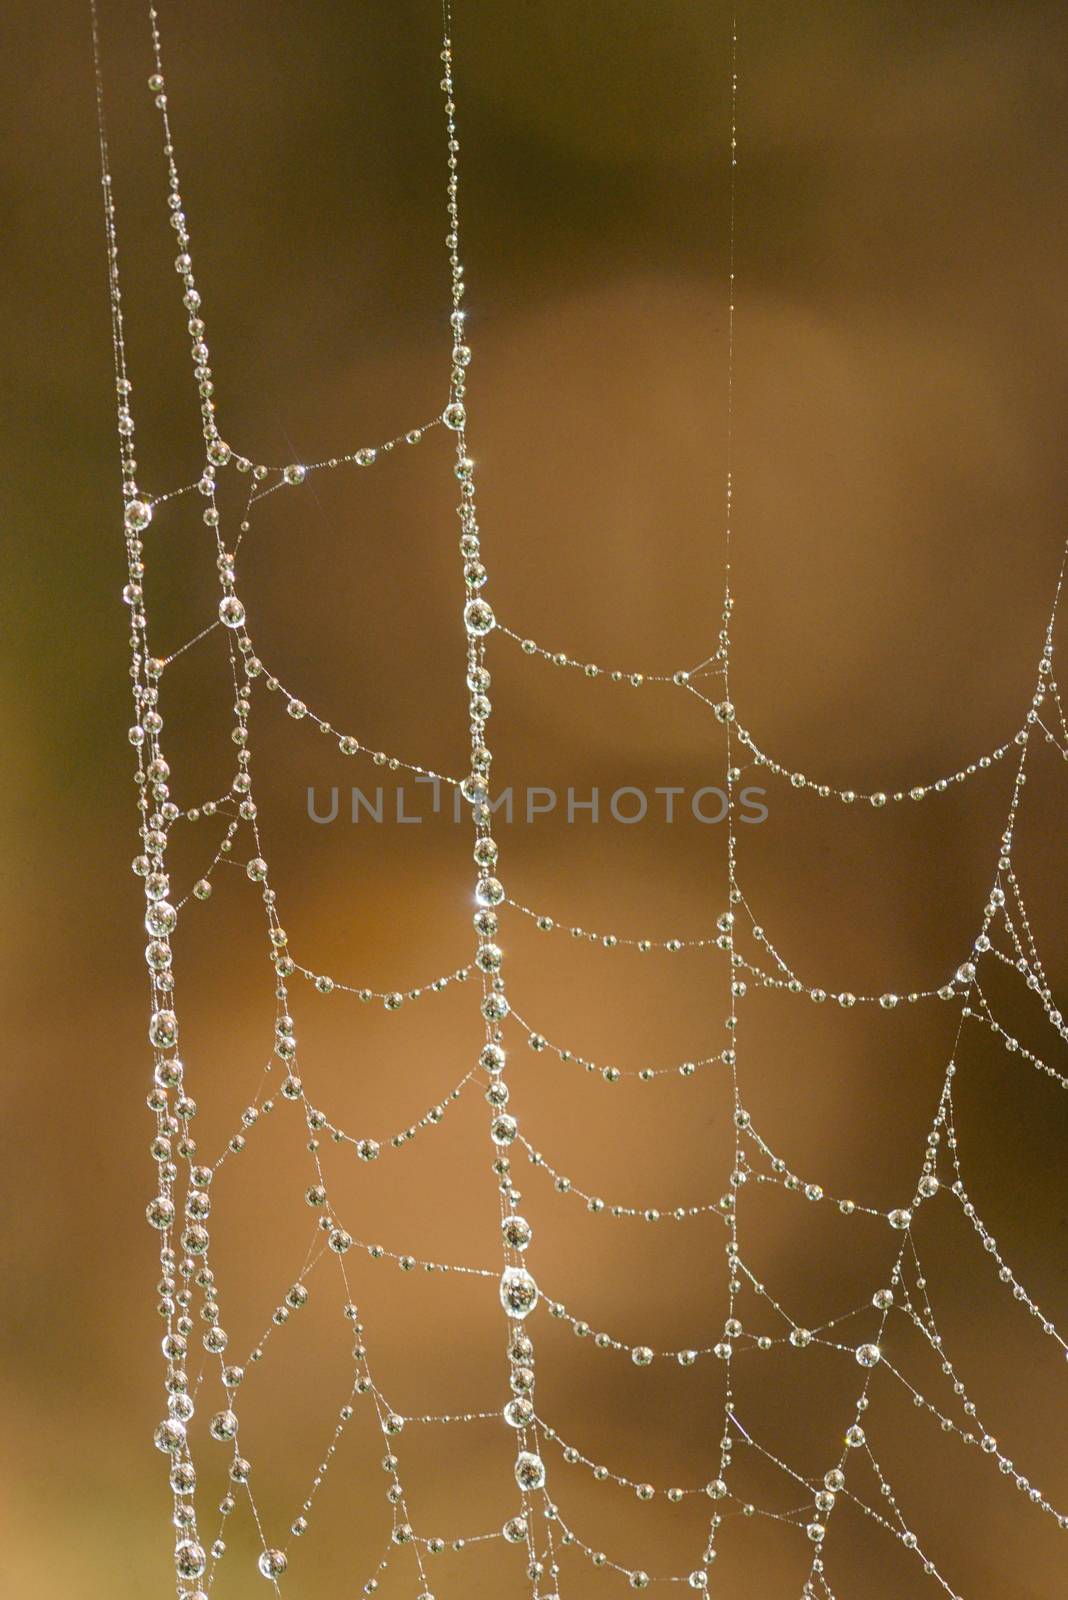 Spider web with water drops by mady70